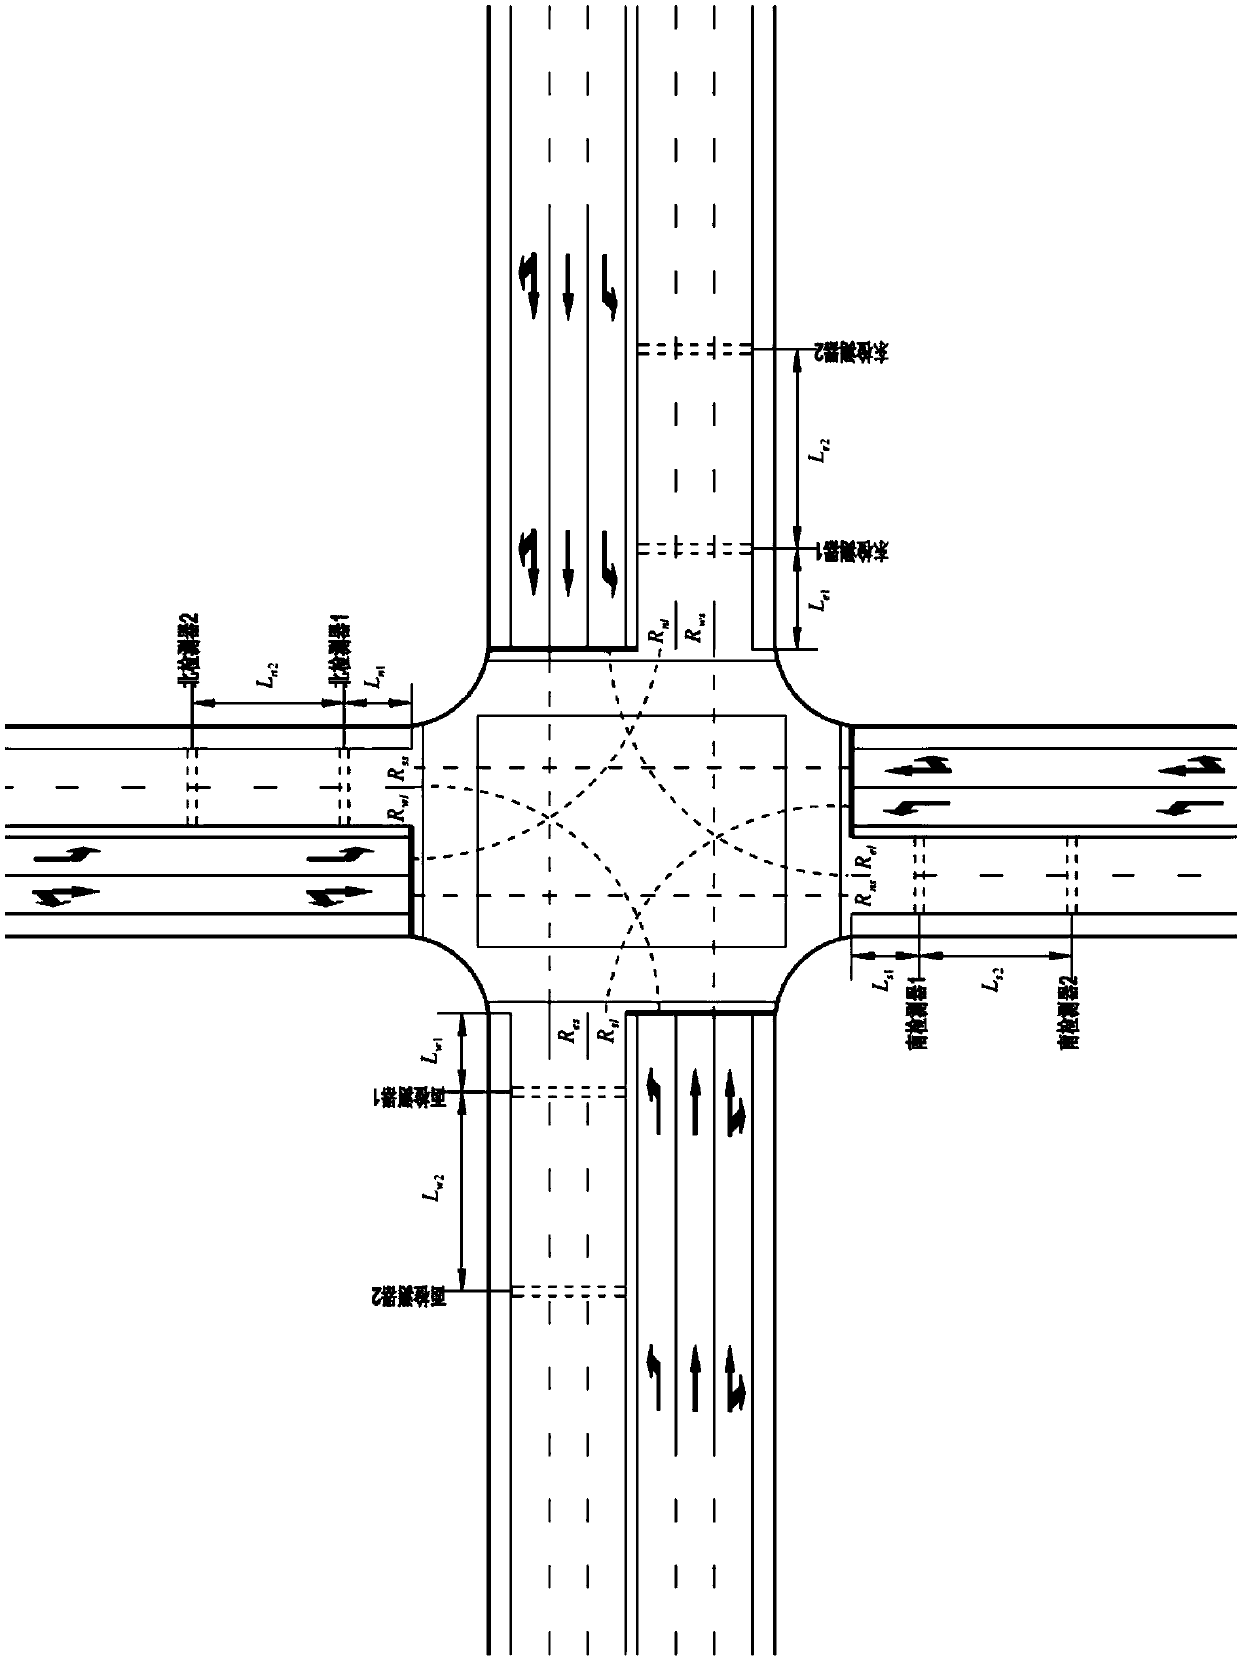 A Control Method of Intersection Signal Based on Exit Remaining Capacity Constraint